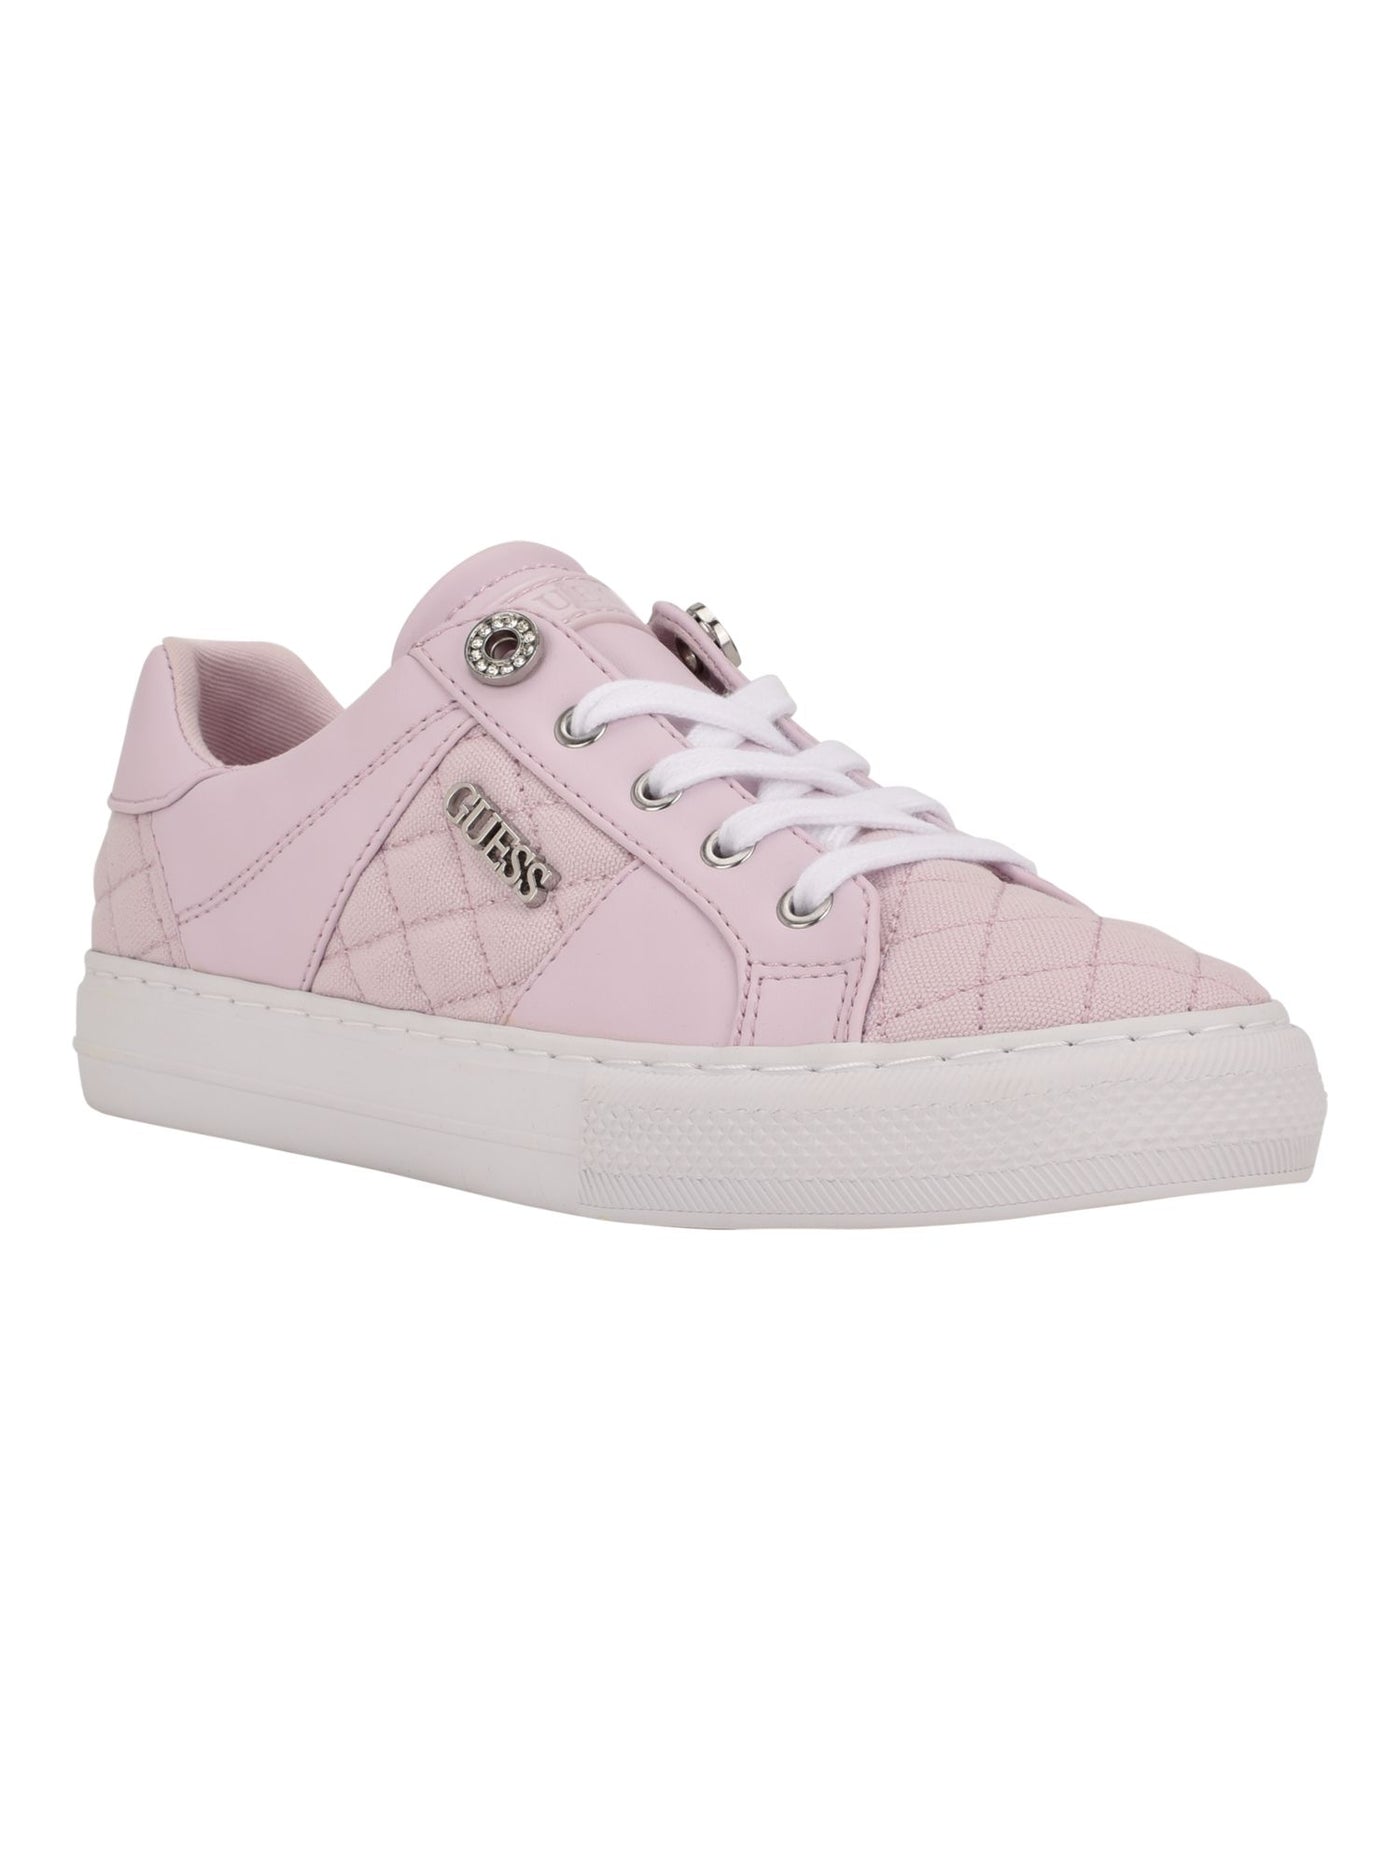 GUESS Womens Pink Comfort Loven Round Toe Lace-Up Sneakers Shoes 9.5 M